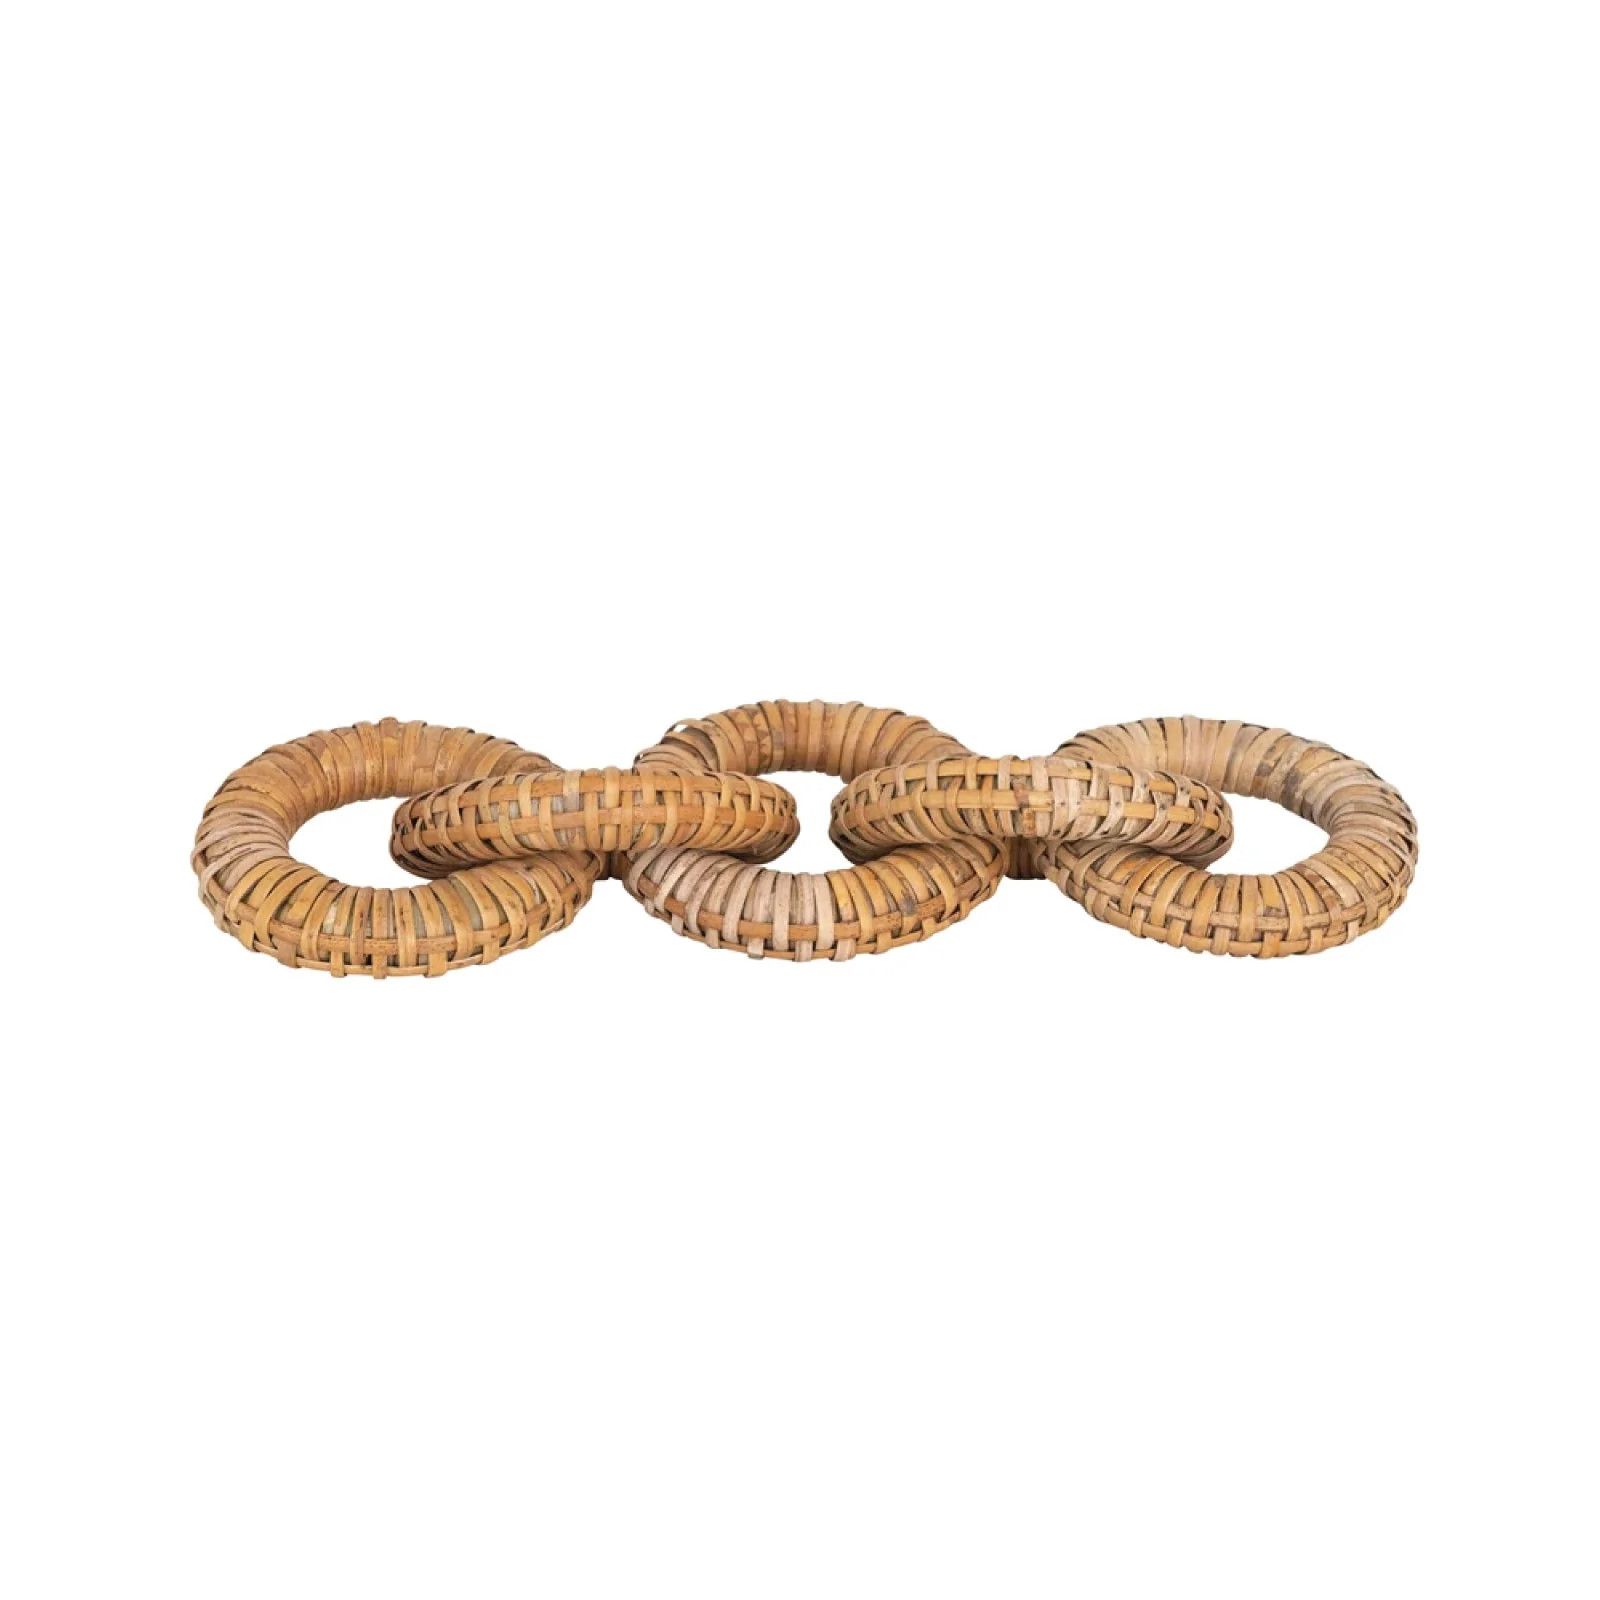 Rattan Wrapped Chain Link | Brooke and Lou